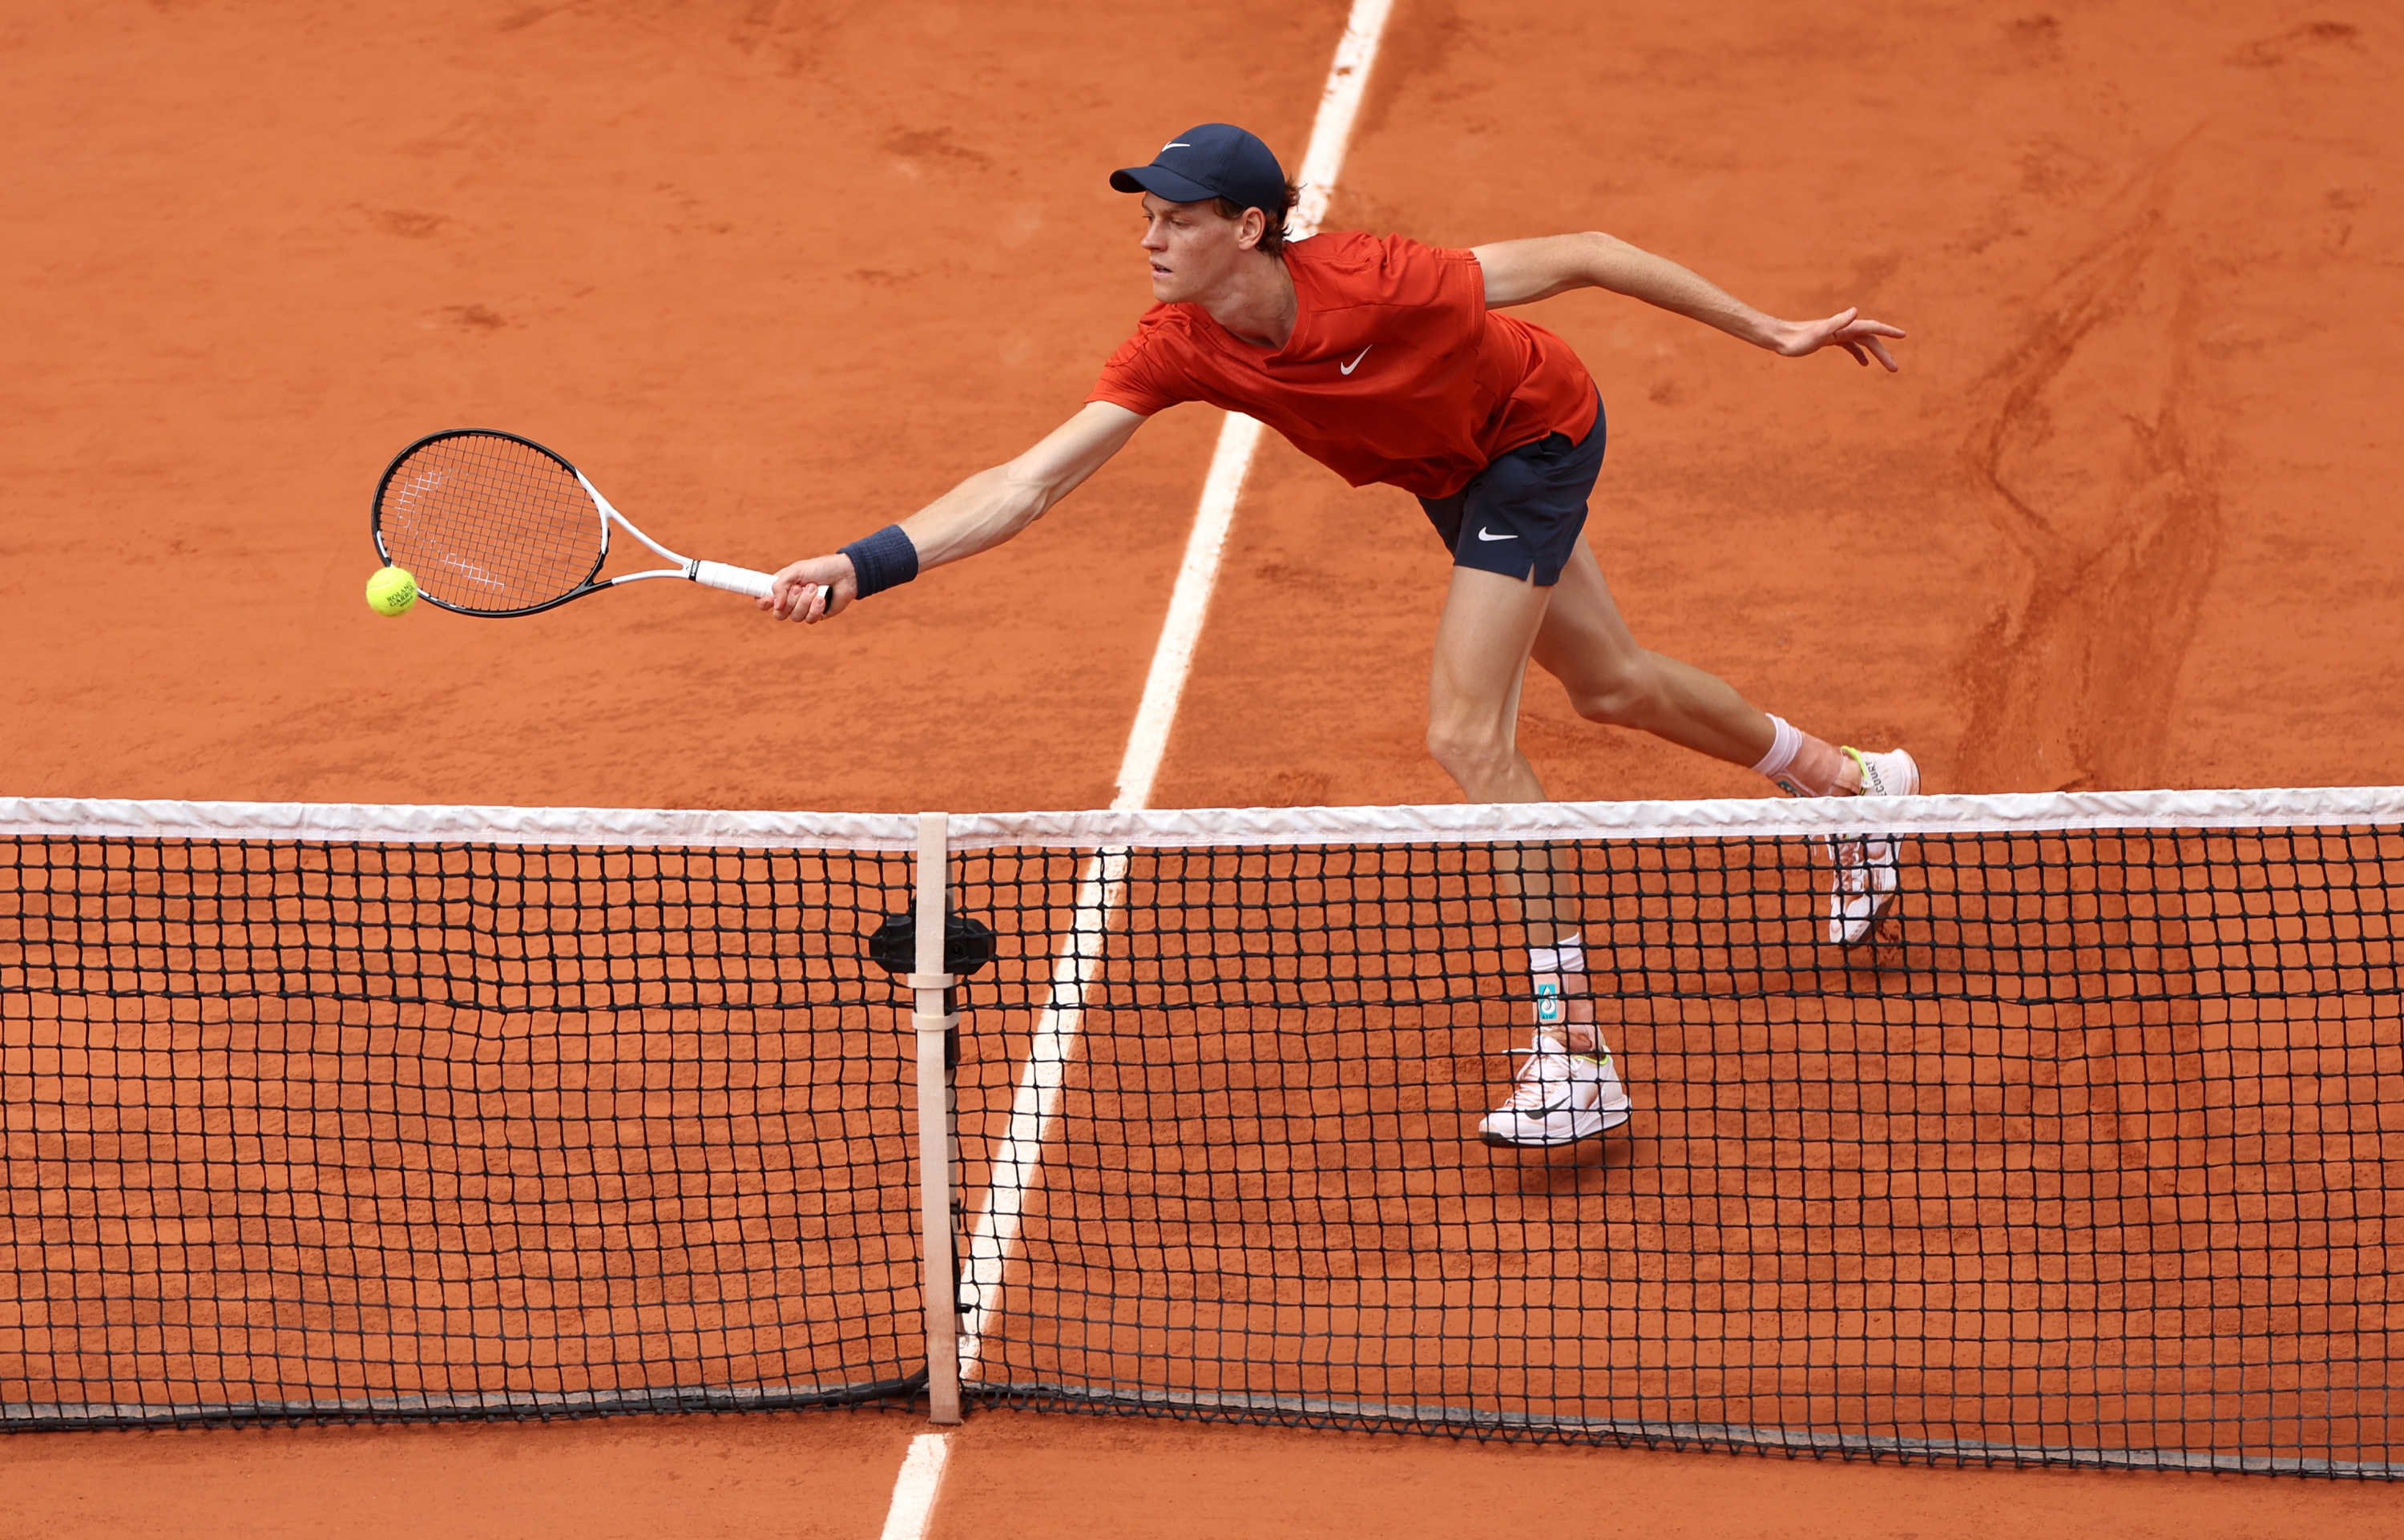 PARIS, FRANCE - JUNE 04: Jannik Sinner of Italy plays a forehand against Grigor Dimitrov of Bulgaria in the Men's Singles Quarter Final match during Day Ten of the 2024 French Open at Roland Garros on June 04, 2024 in Paris, France. (Photo by Dan Istitene/Getty Images)